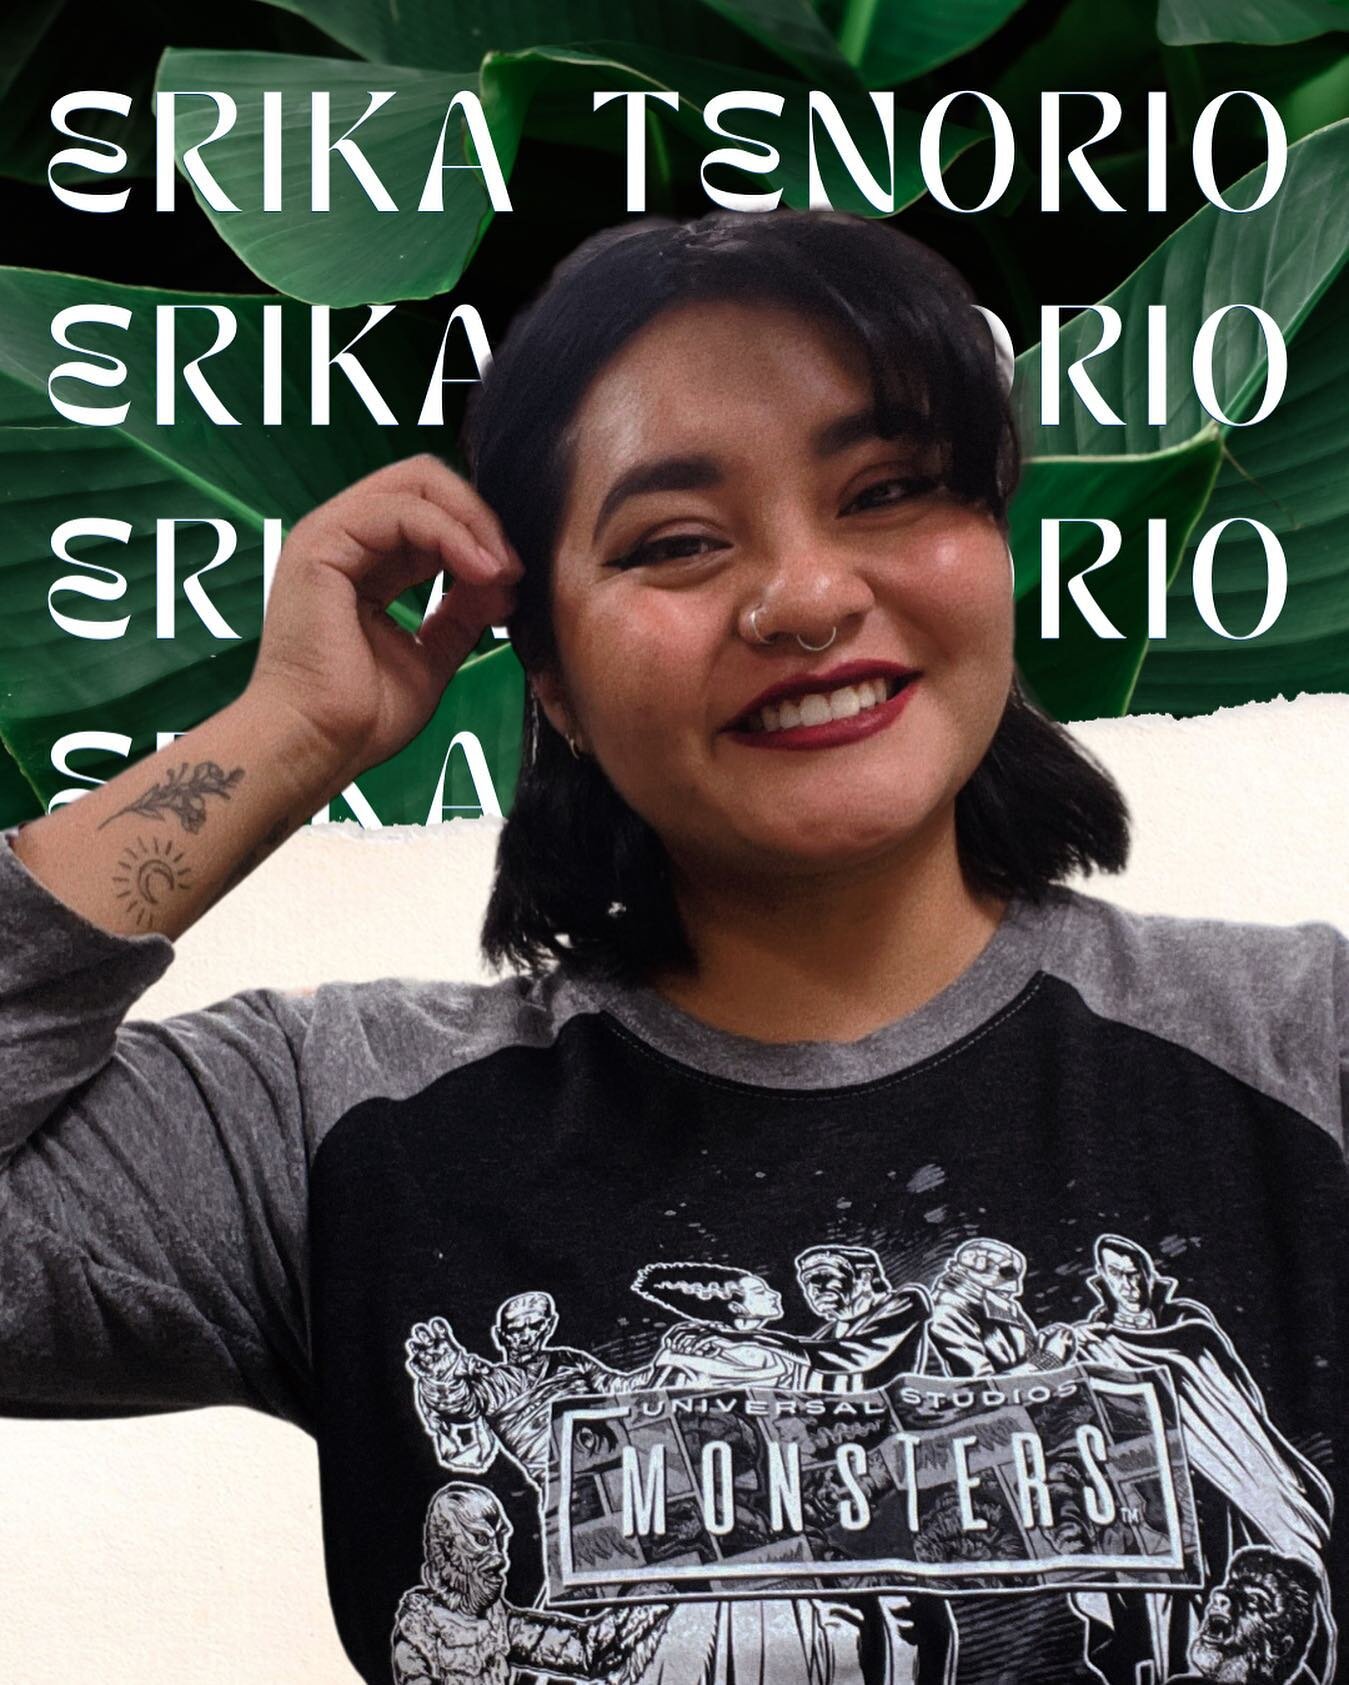 Meet our latest Guest 🎙️

Koi Murio, Tui Taewai, S-ke:g Tas, my name is Erika Tenorio. I am a Queer Nicaraguense-Mexican Indigenous from the Chorotega, Yaqui, and Tohono O'odham communities respectively, and I was born and raised in Tucson, Az. I am